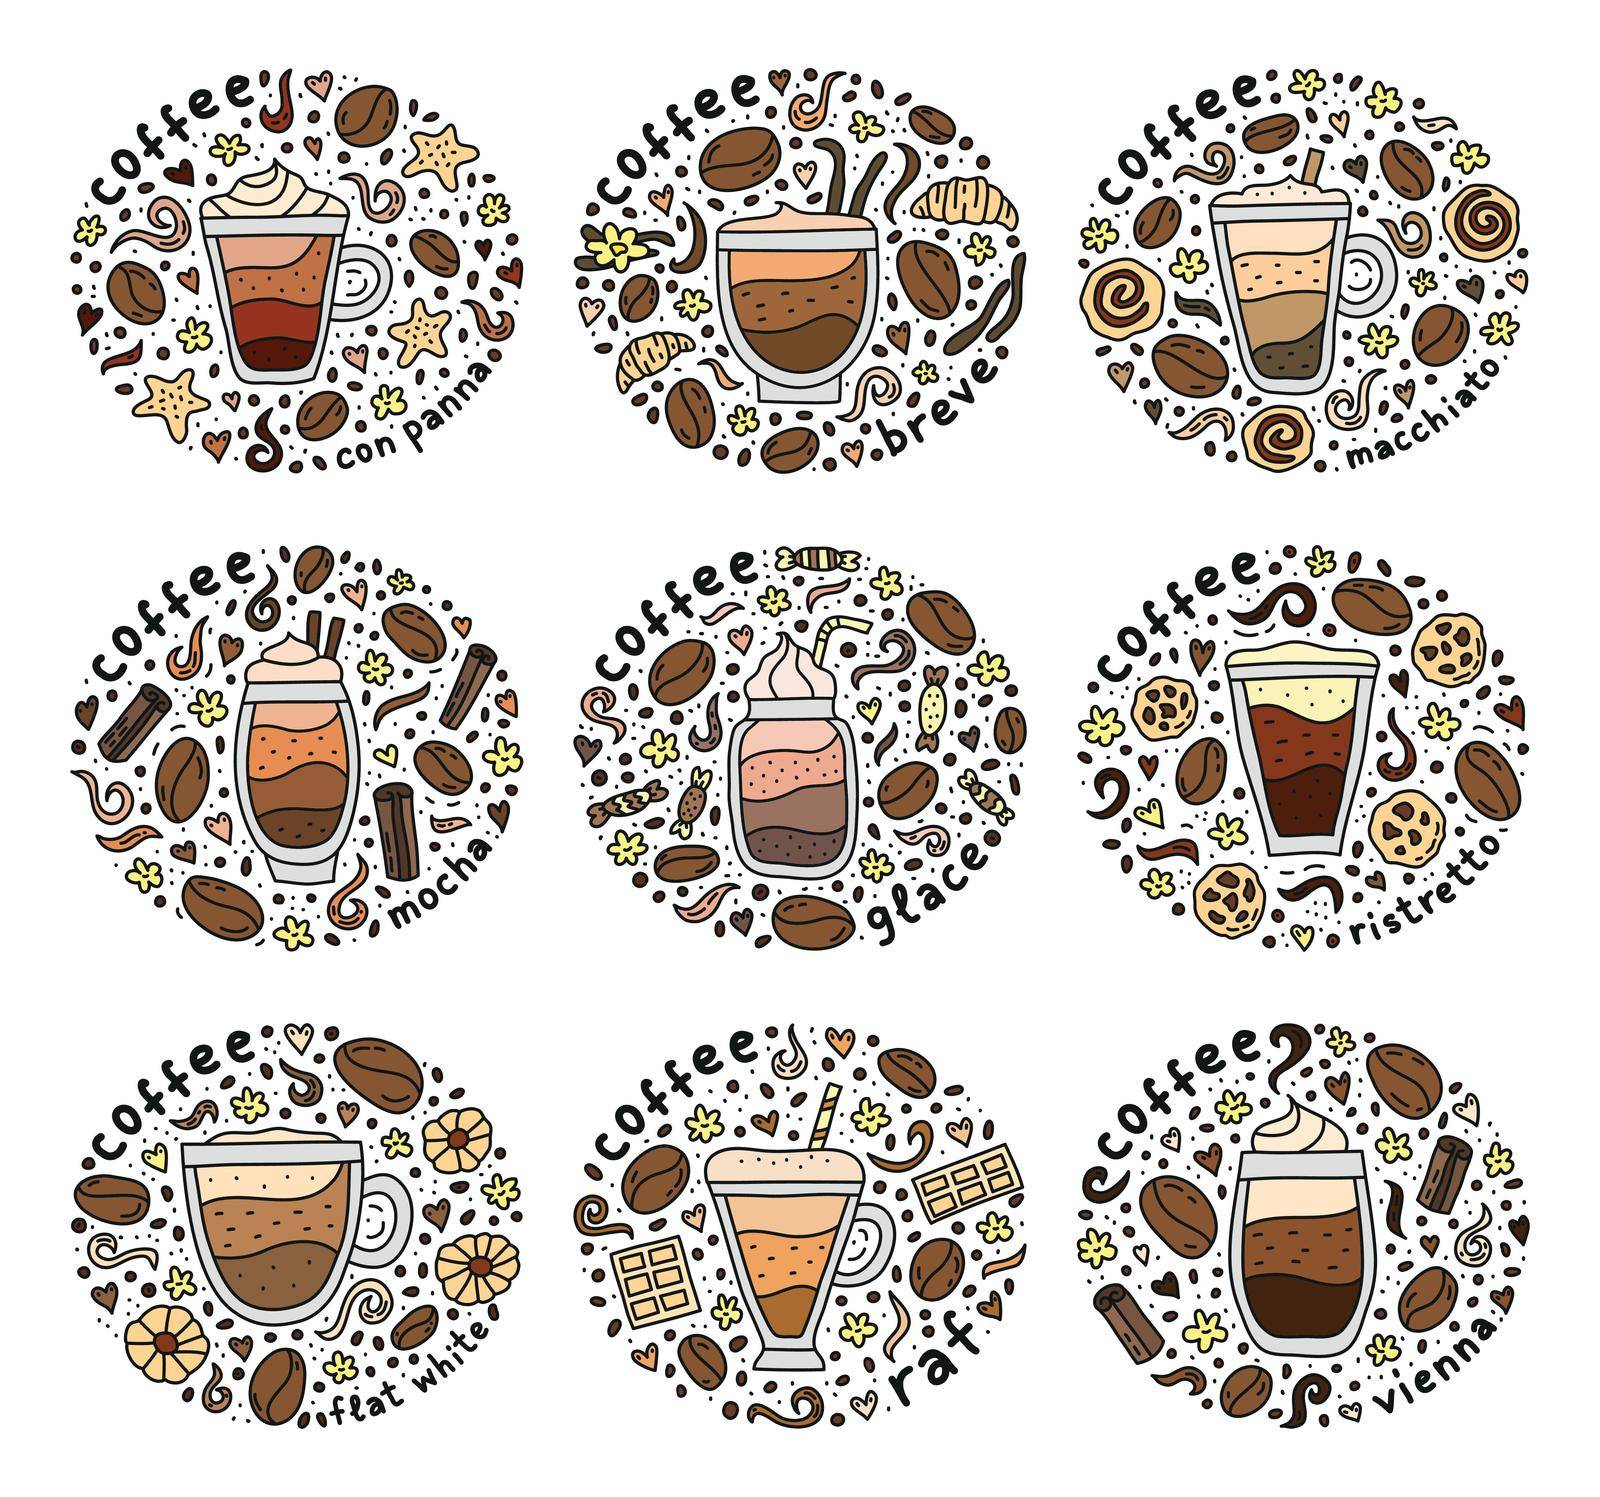 Set of cute compositions with doodle colored coffee drinks, lettering and other elements isolated on white background.